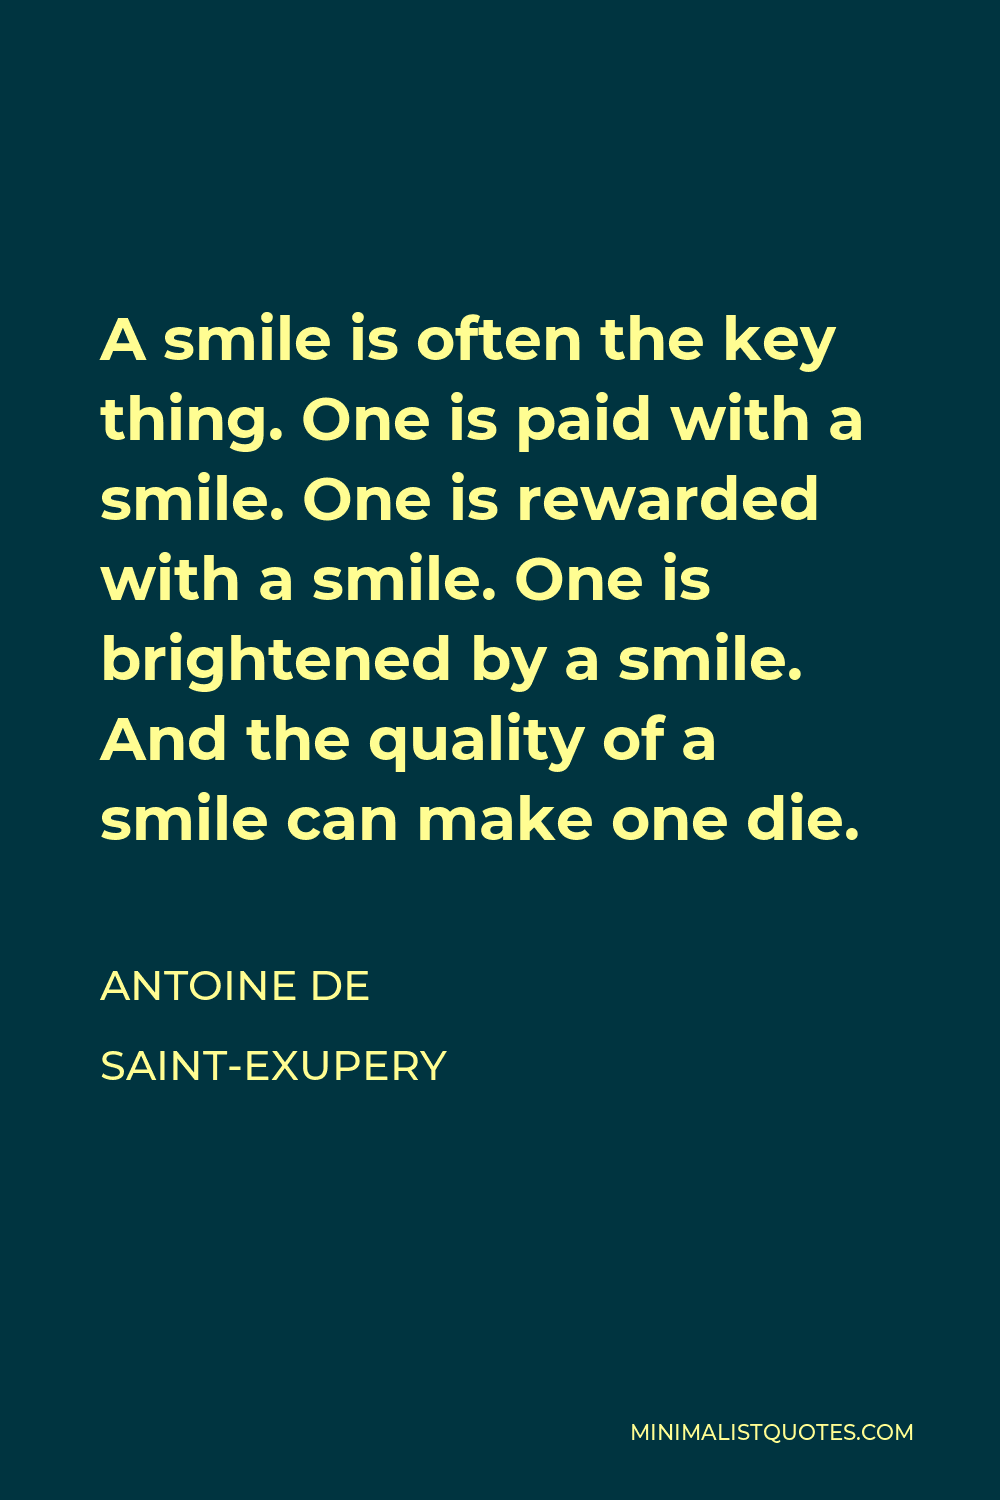 Antoine de Saint-Exupery Quote - A smile is often the key thing. One is paid with a smile. One is rewarded with a smile. One is brightened by a smile. And the quality of a smile can make one die.